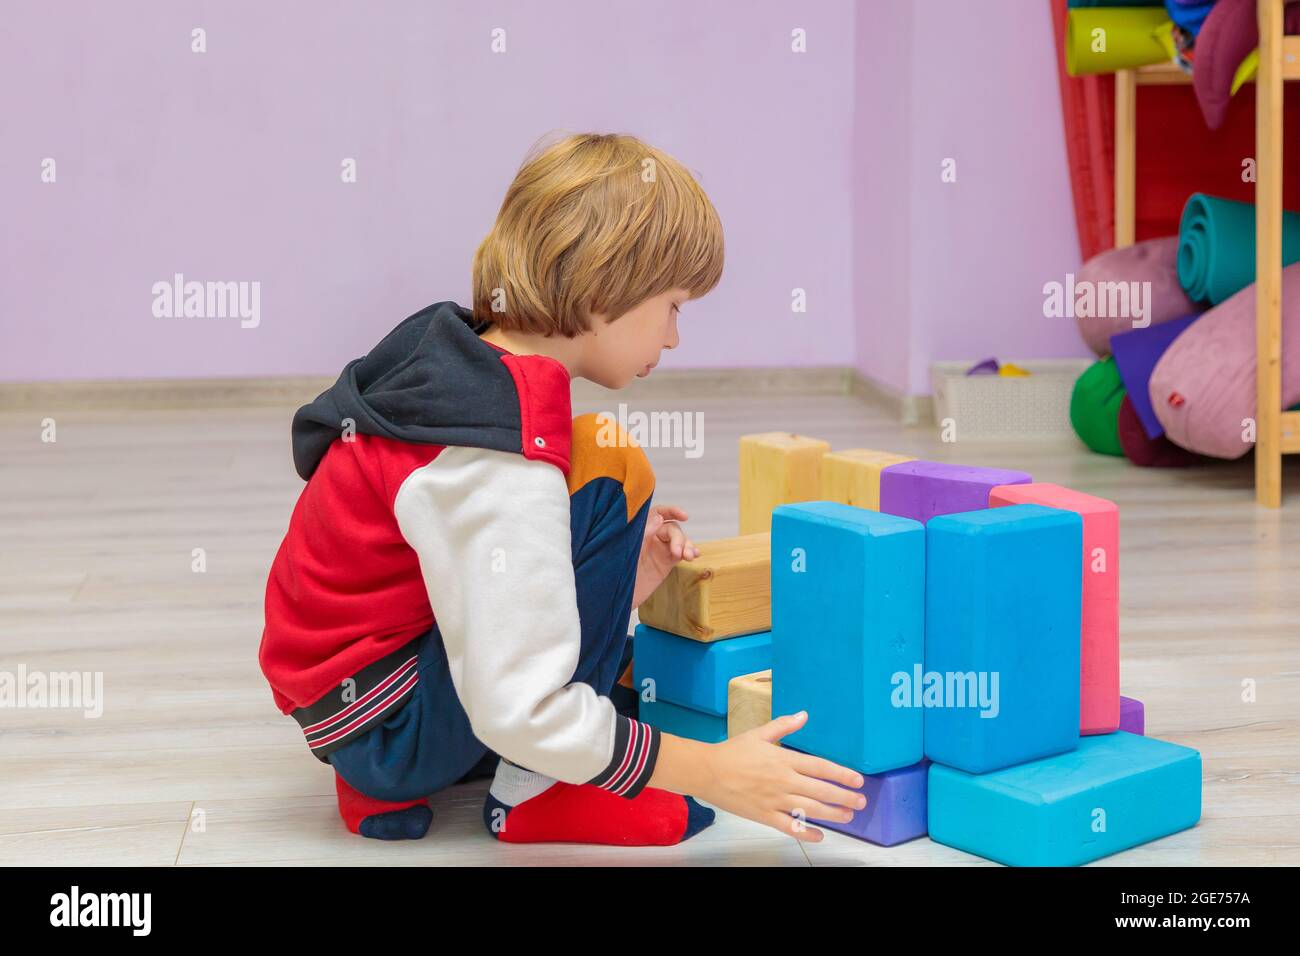 In the hall, the child collects toy cubes. The boy plays in the hall with sports items. Stock Photo